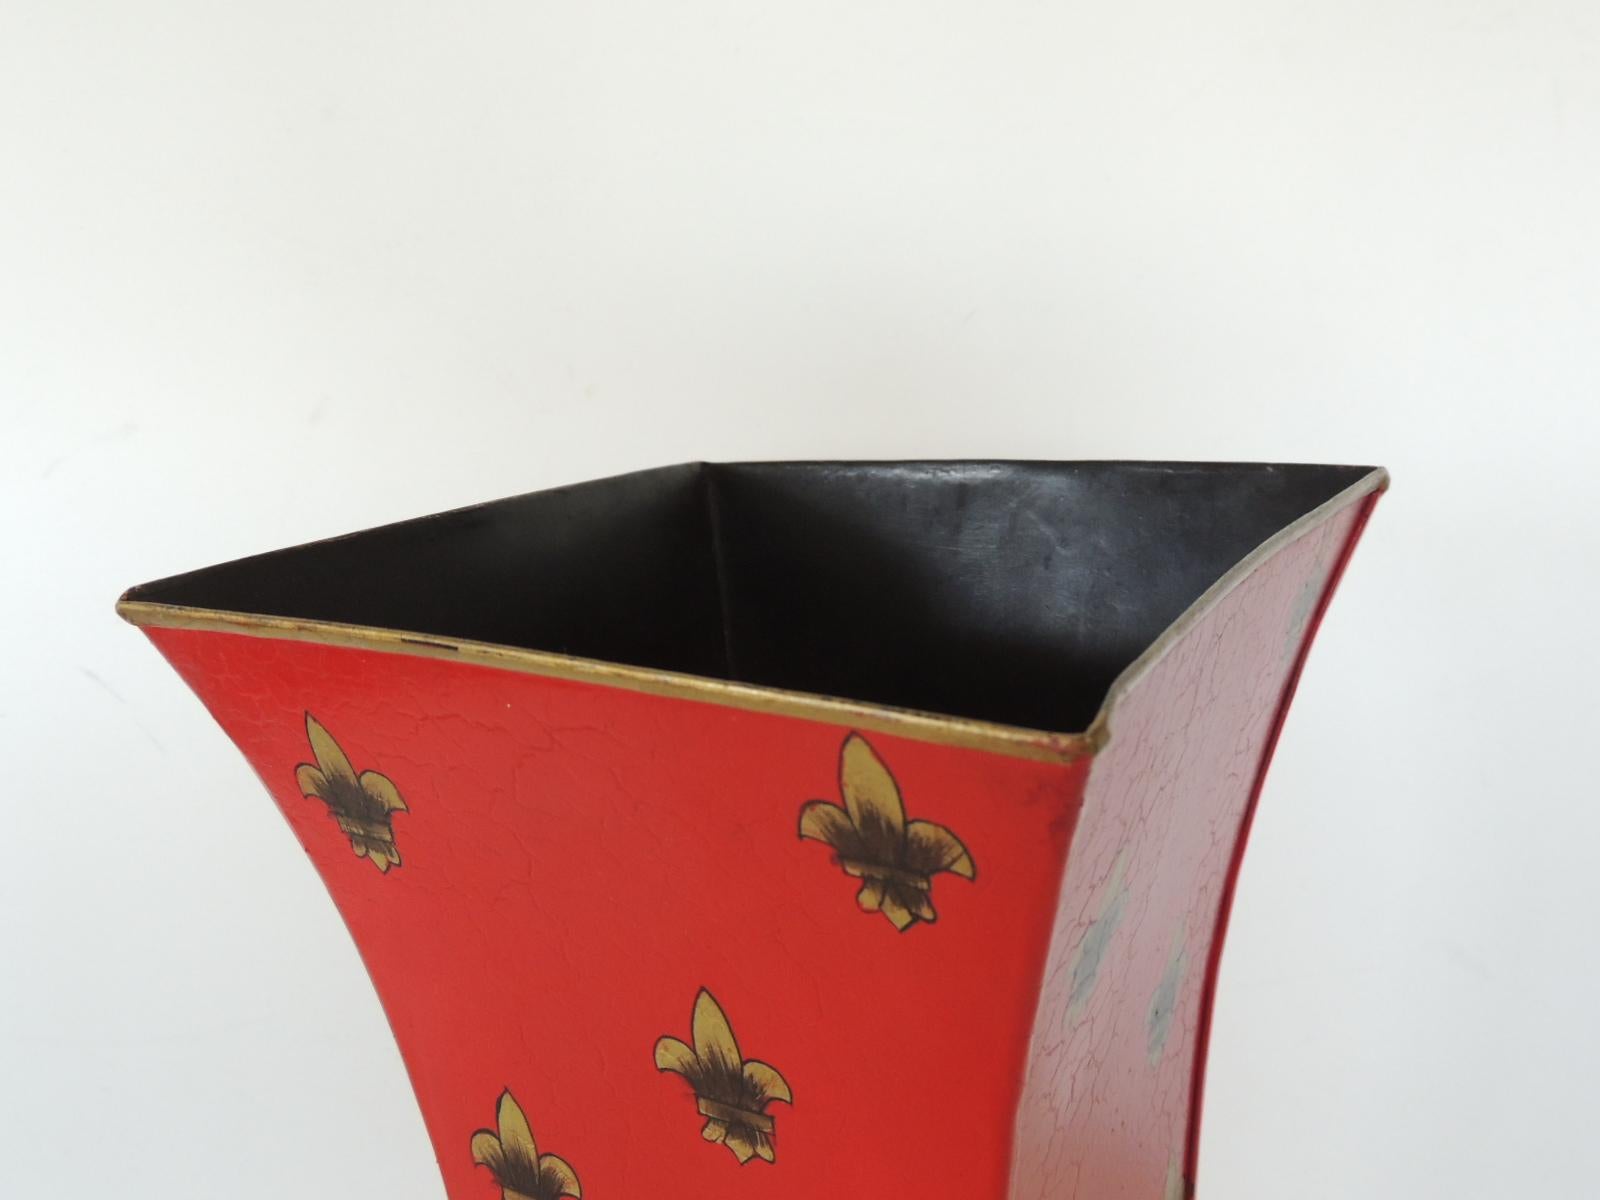 Hand-Crafted Red and Gold Tall Cachepot with Fleur-de-Lis Design